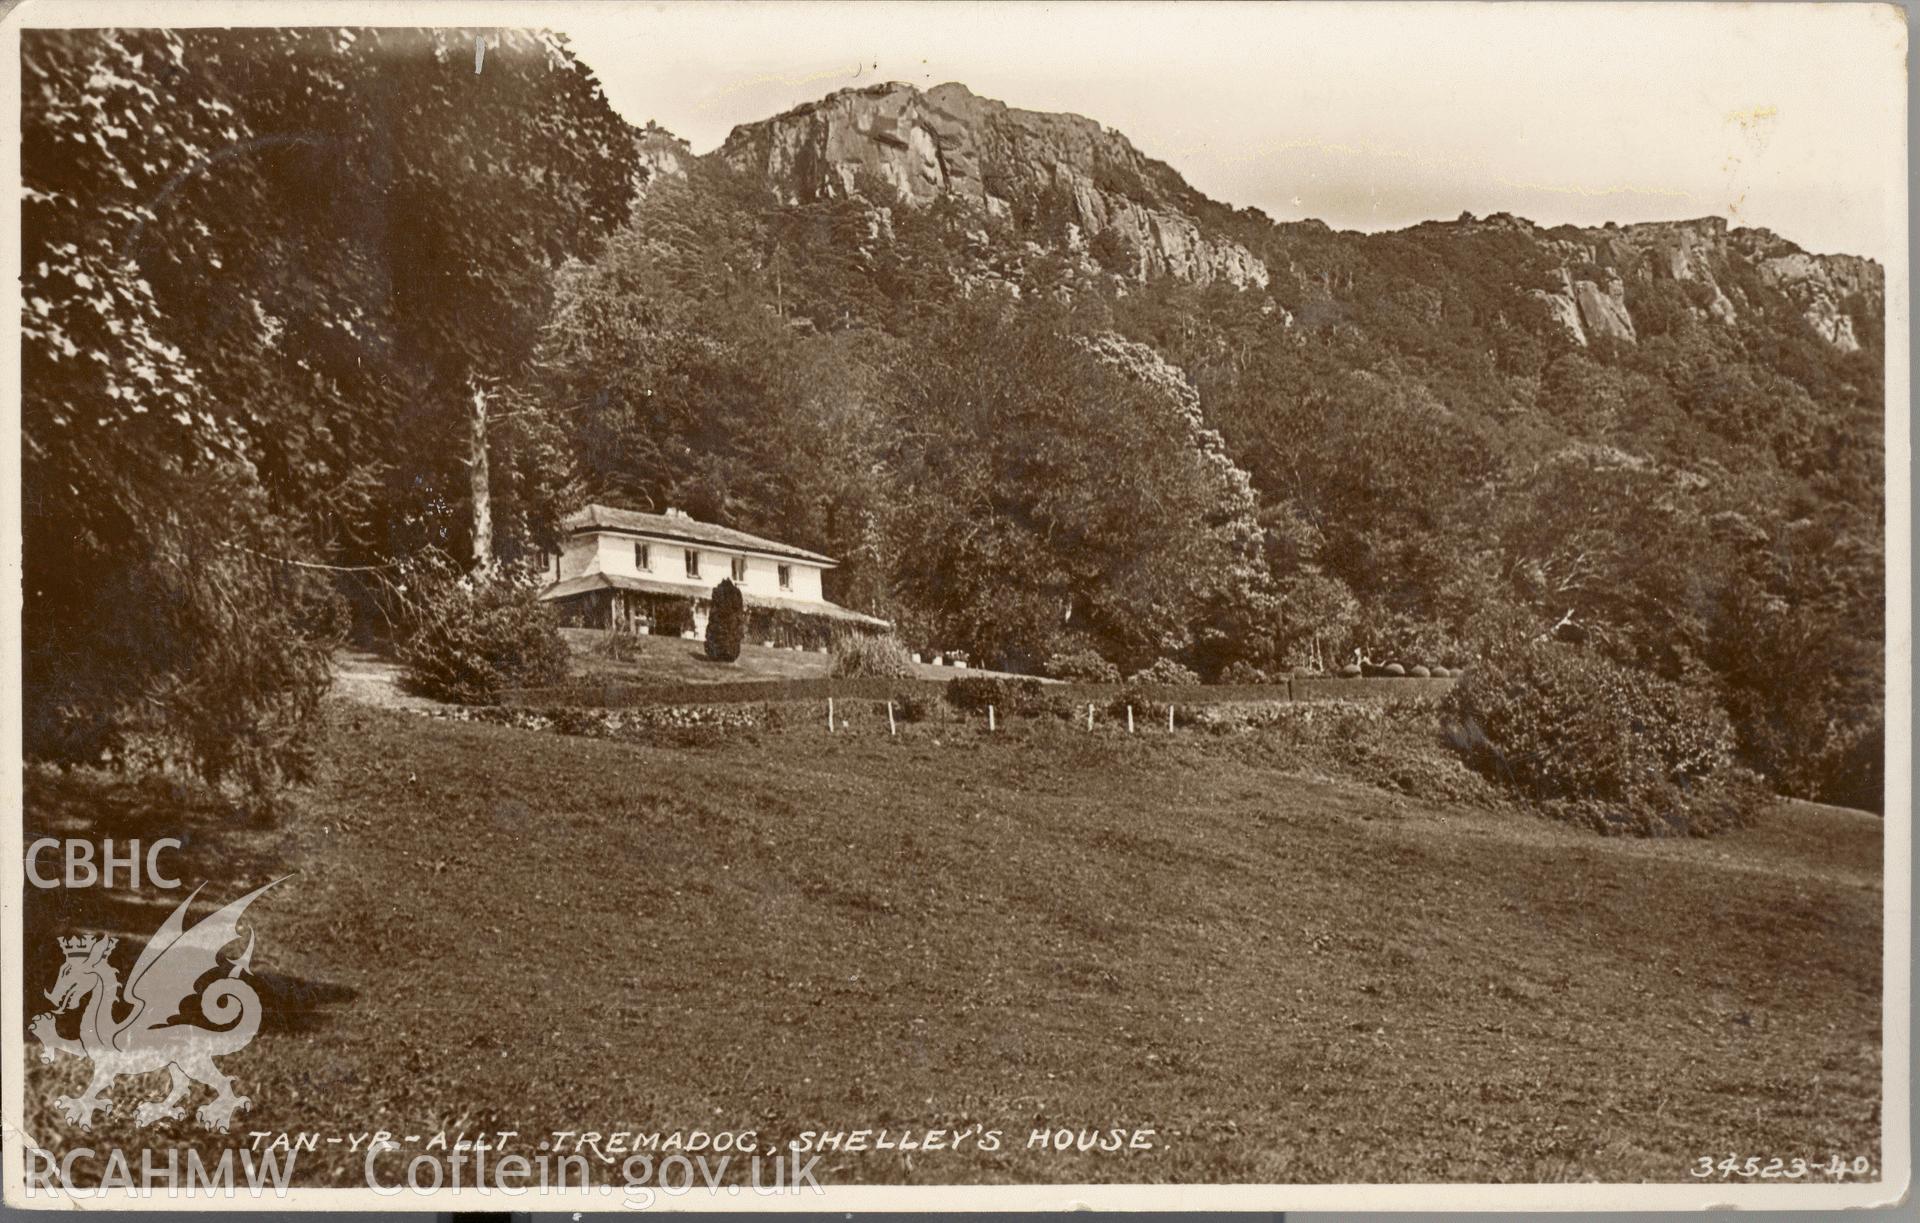 Digitised postcard image of Tan-yr-allt, Tremadog, W.H.S. & S. Ltd. Produced by Parks and Gardens Data Services, from an original item in the Peter Davis Collection at Parks and Gardens UK. We hold only web-resolution images of this collection, suitable for viewing on screen and for research purposes only. We do not hold the original images, or publication quality scans.